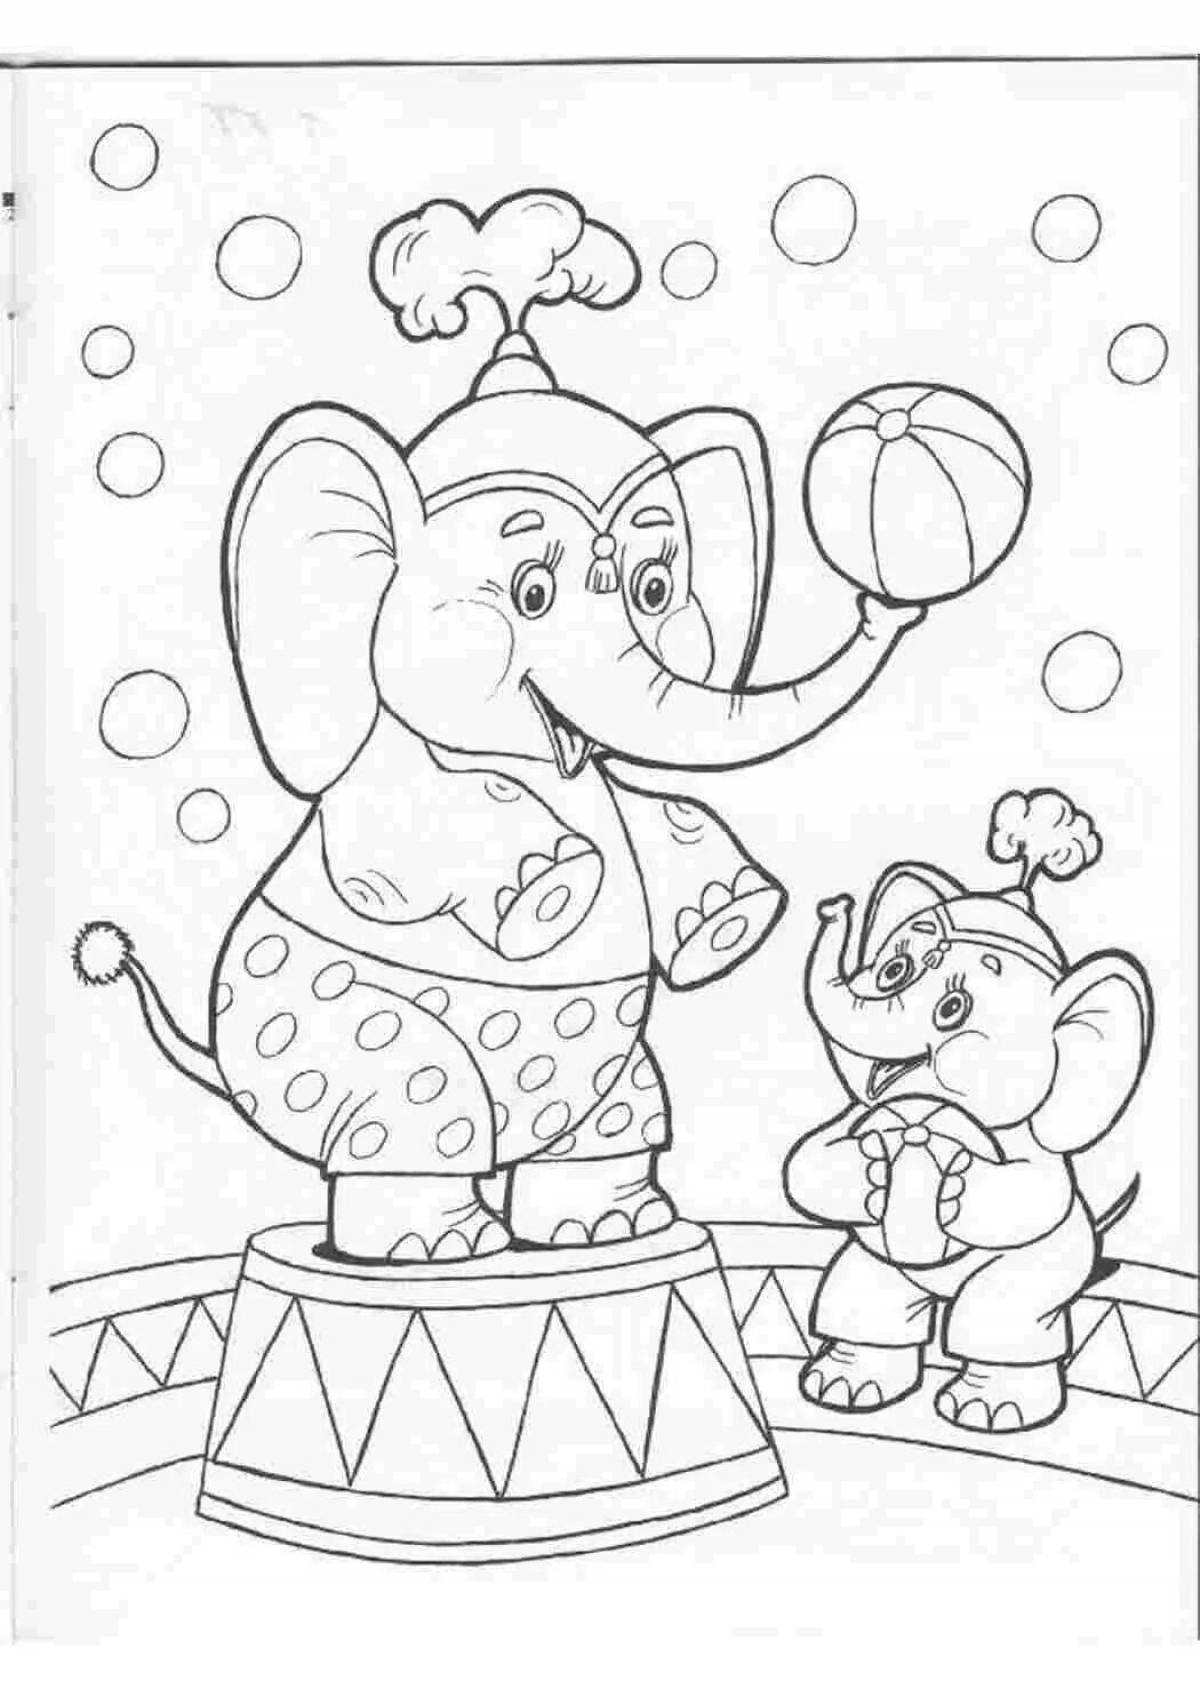 Rampant circus elephant coloring page